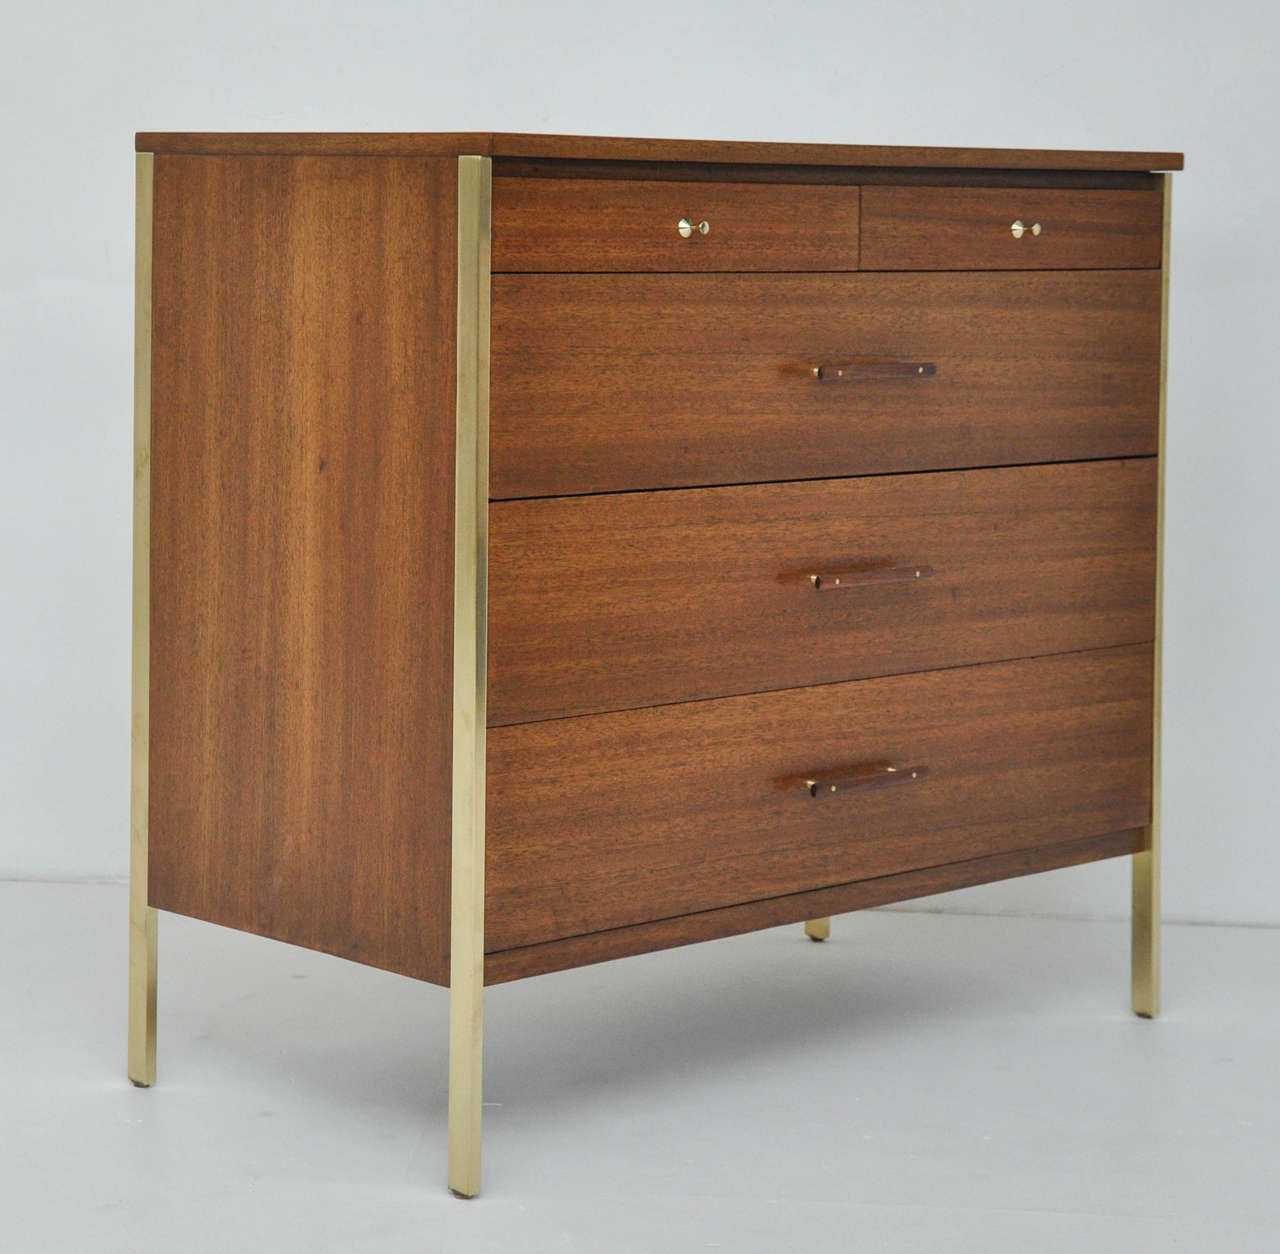 Walnut and brass chest by Paul McCobb for Calvin Furniture. Fully restored and refinished.